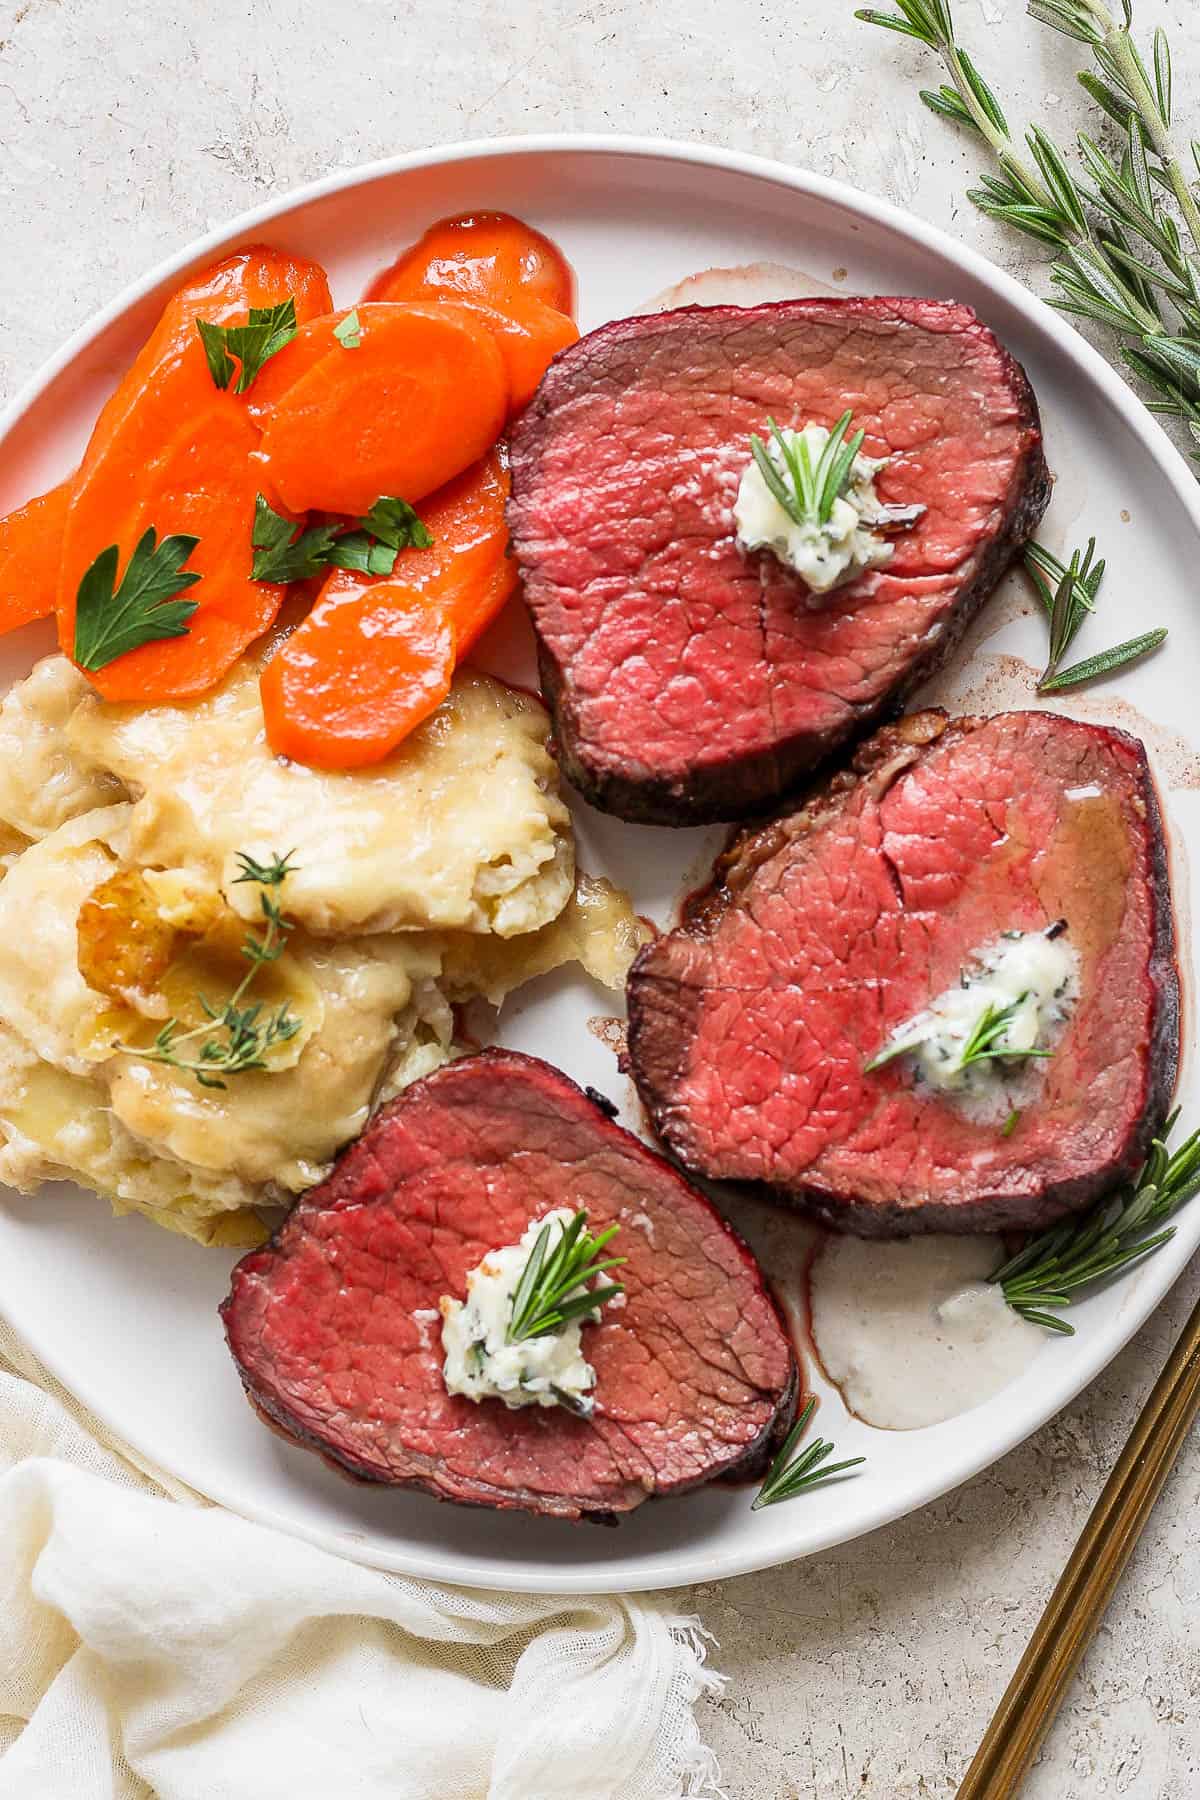 Candied carrots on a dinner plate alongside mashed potatoes and steak tenderloin.